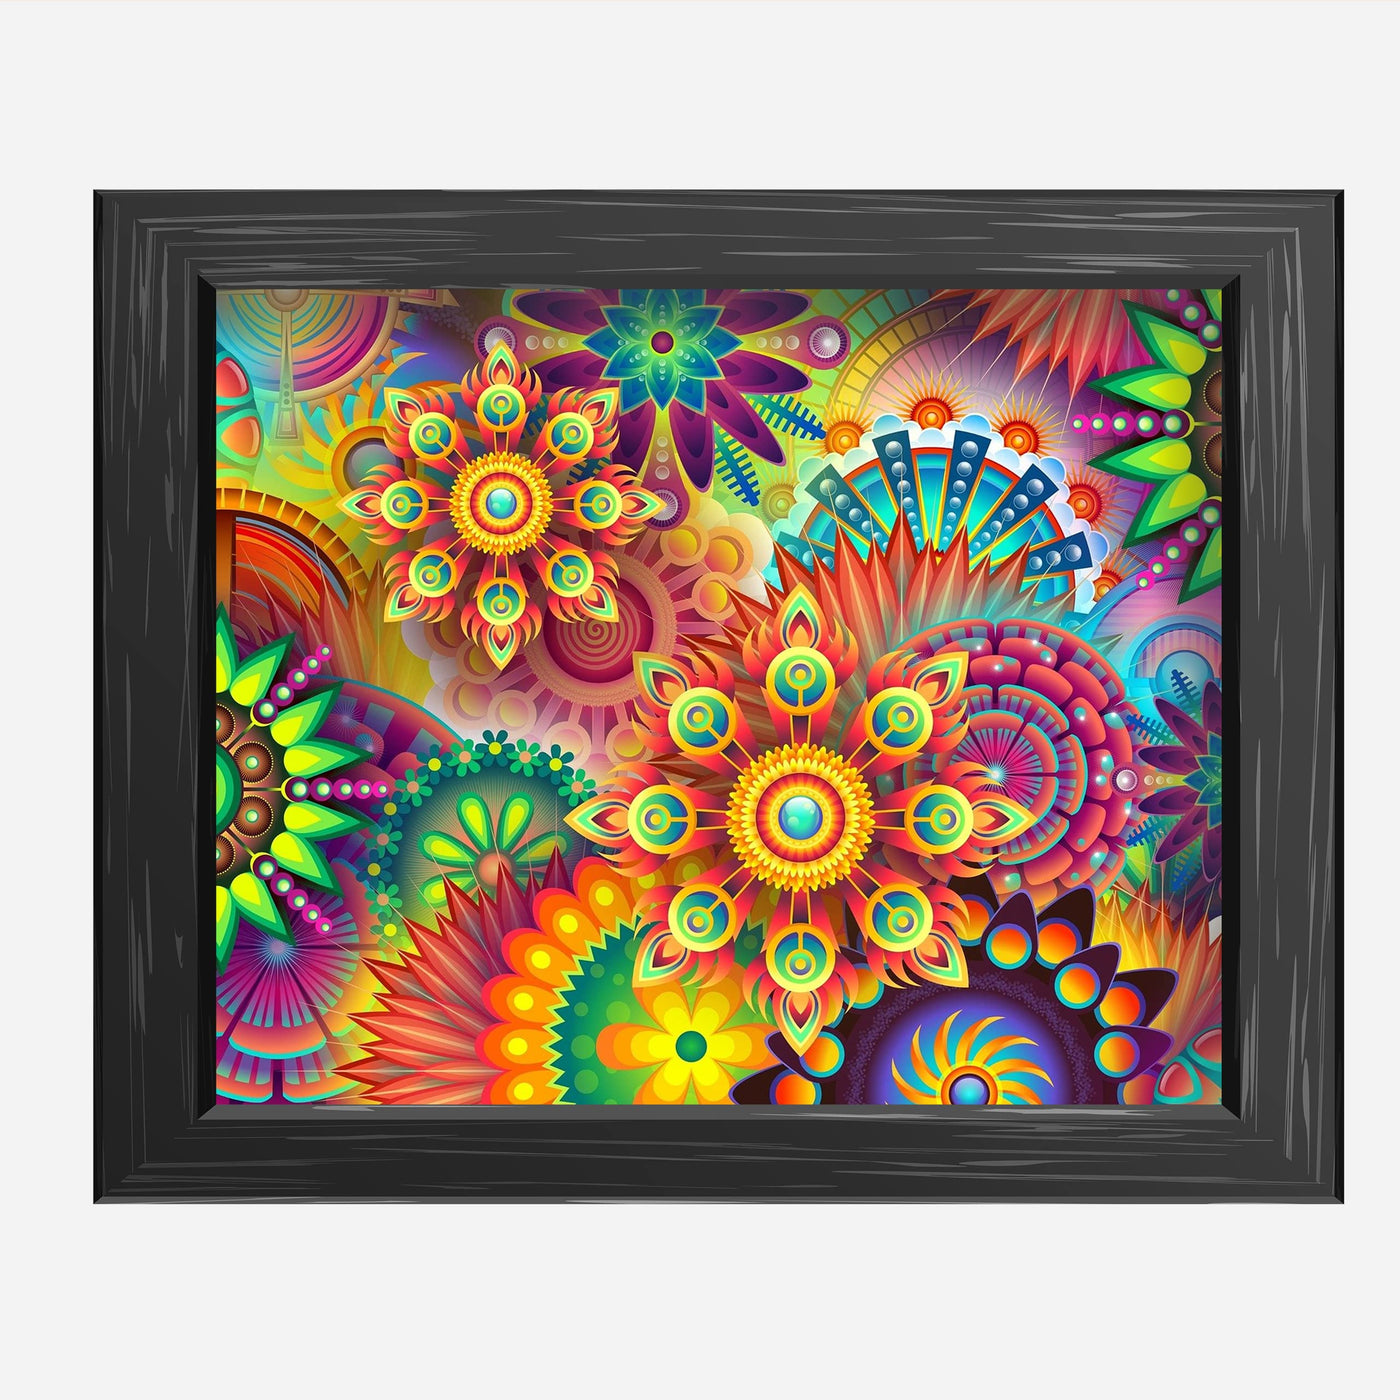 Colorful Geometric Patterns- Inspirational Abstract Artwork Design Wall Art -10 x 8" Bright Colors & Patterns Picture Print -Ready To Frame. Retro Wall Art for Home-Office-Art Classroom Decor!